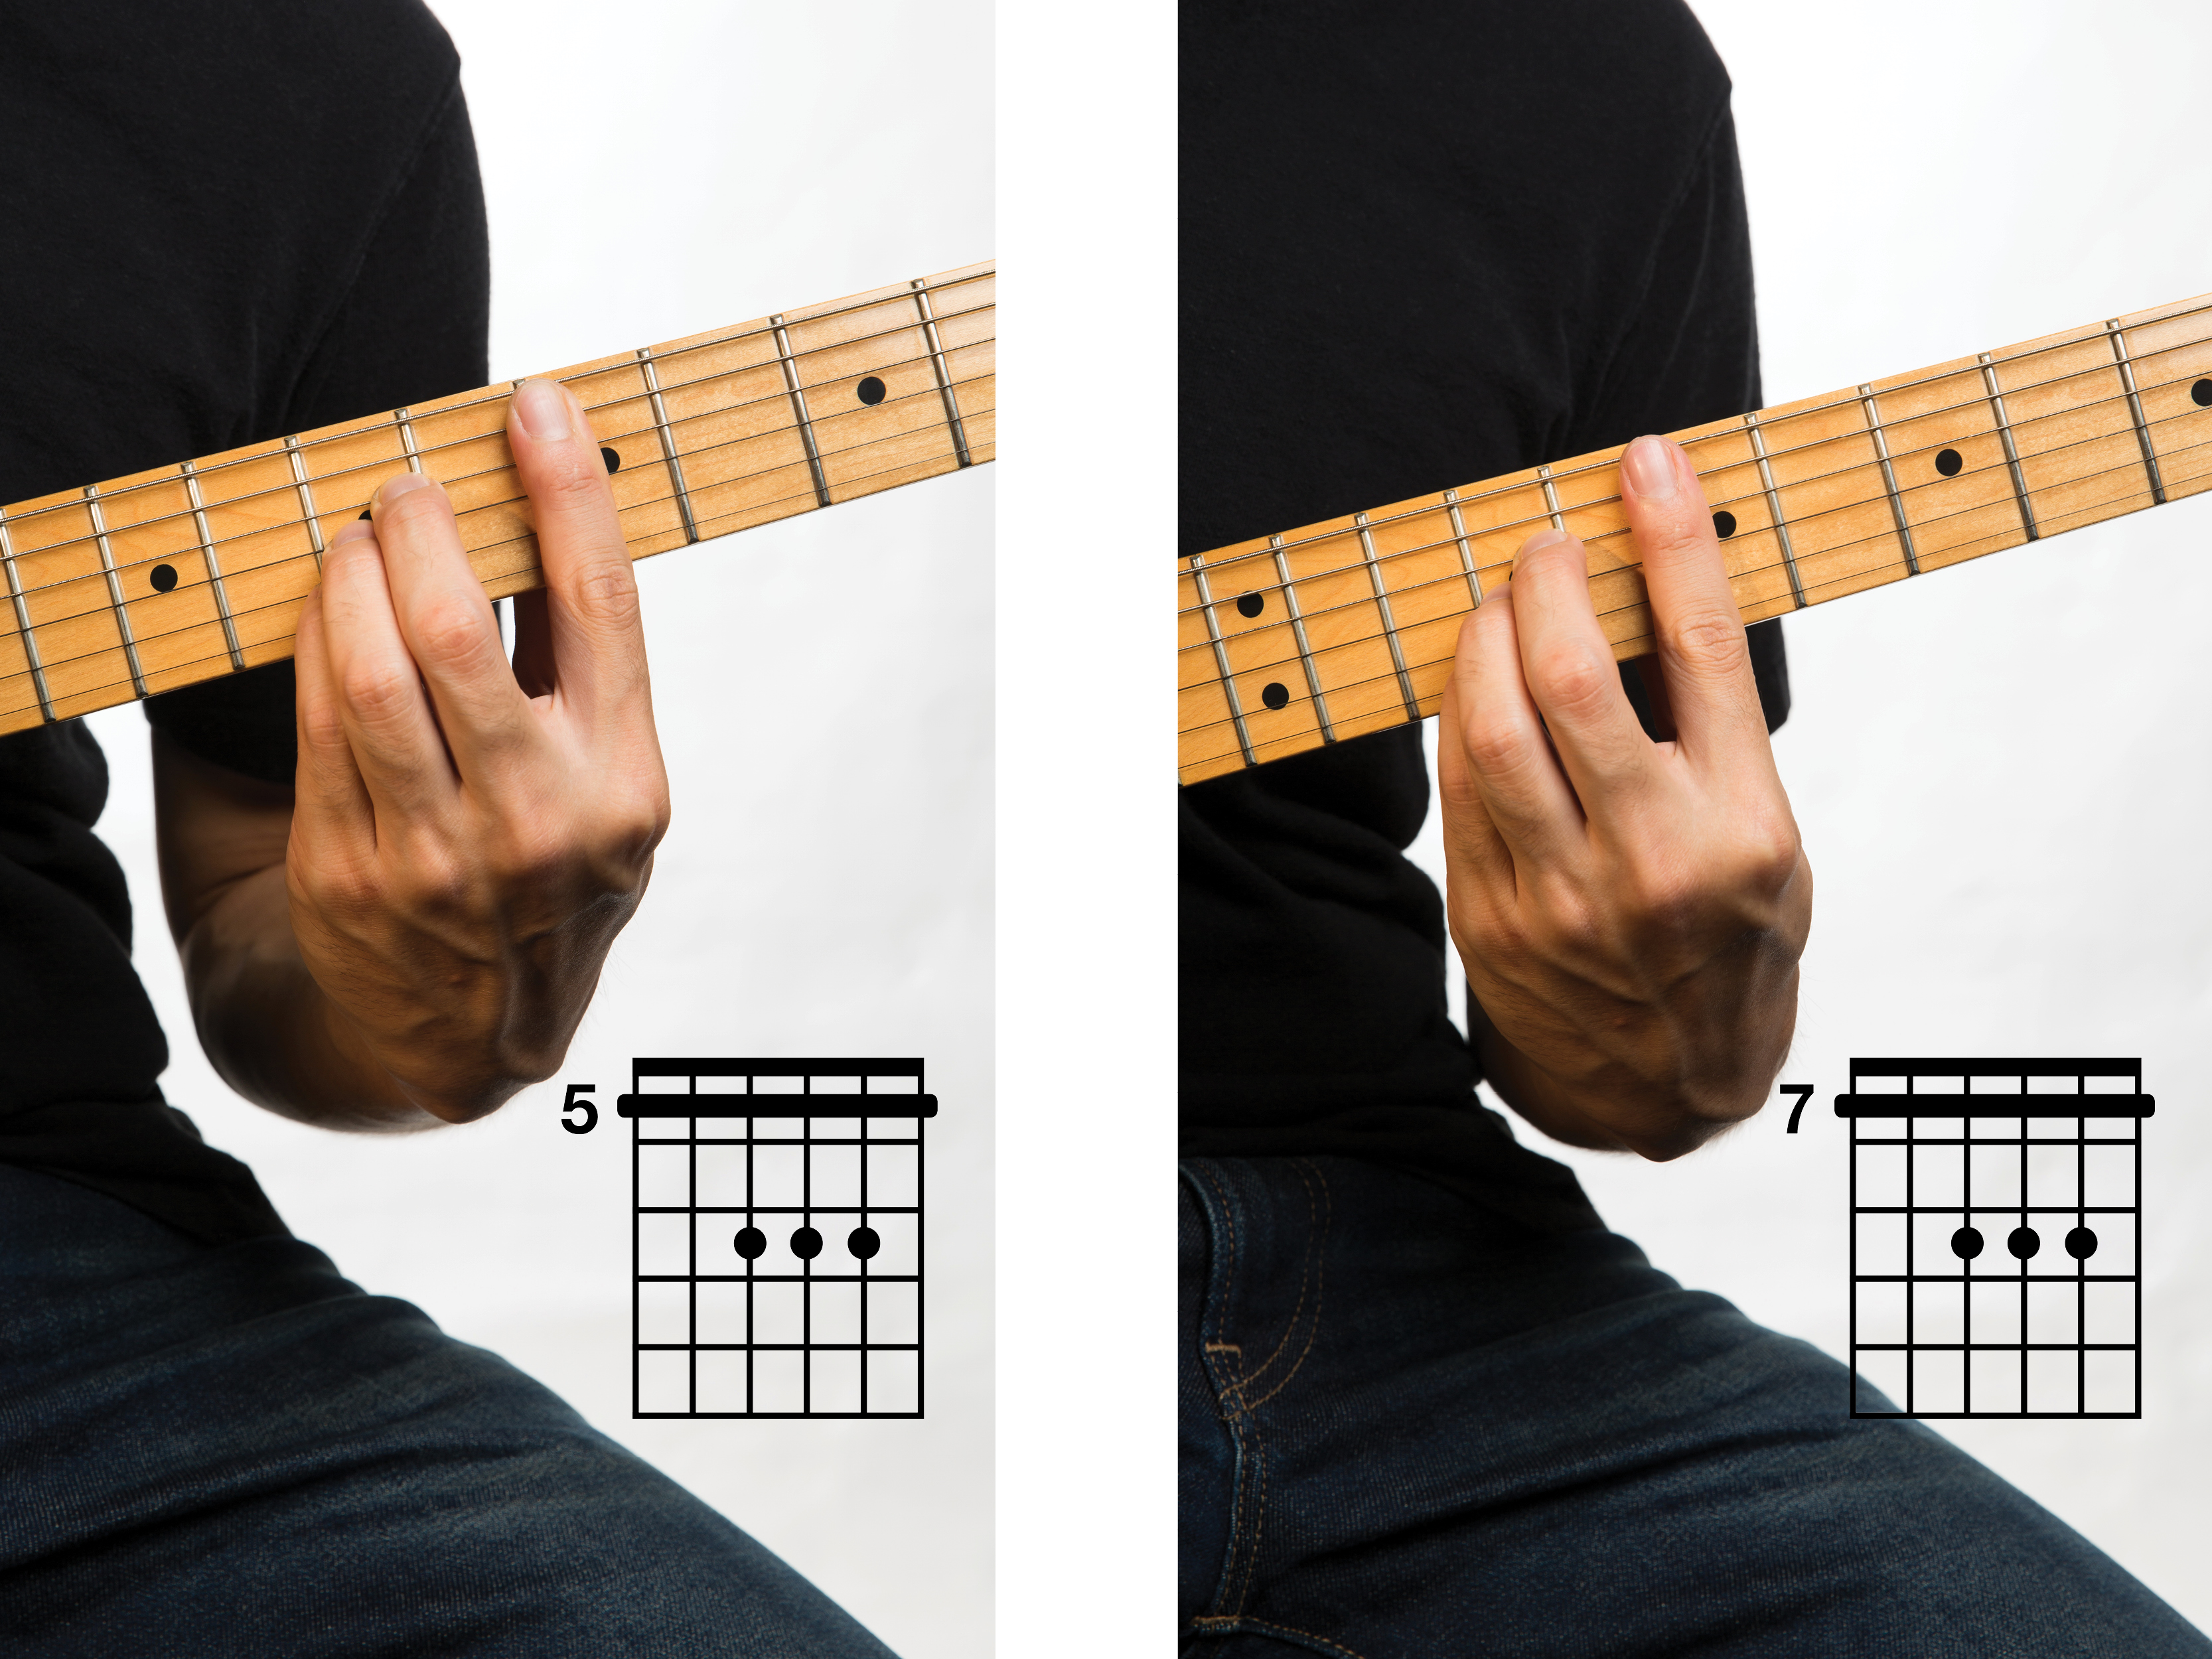 Barred D major and E major chords